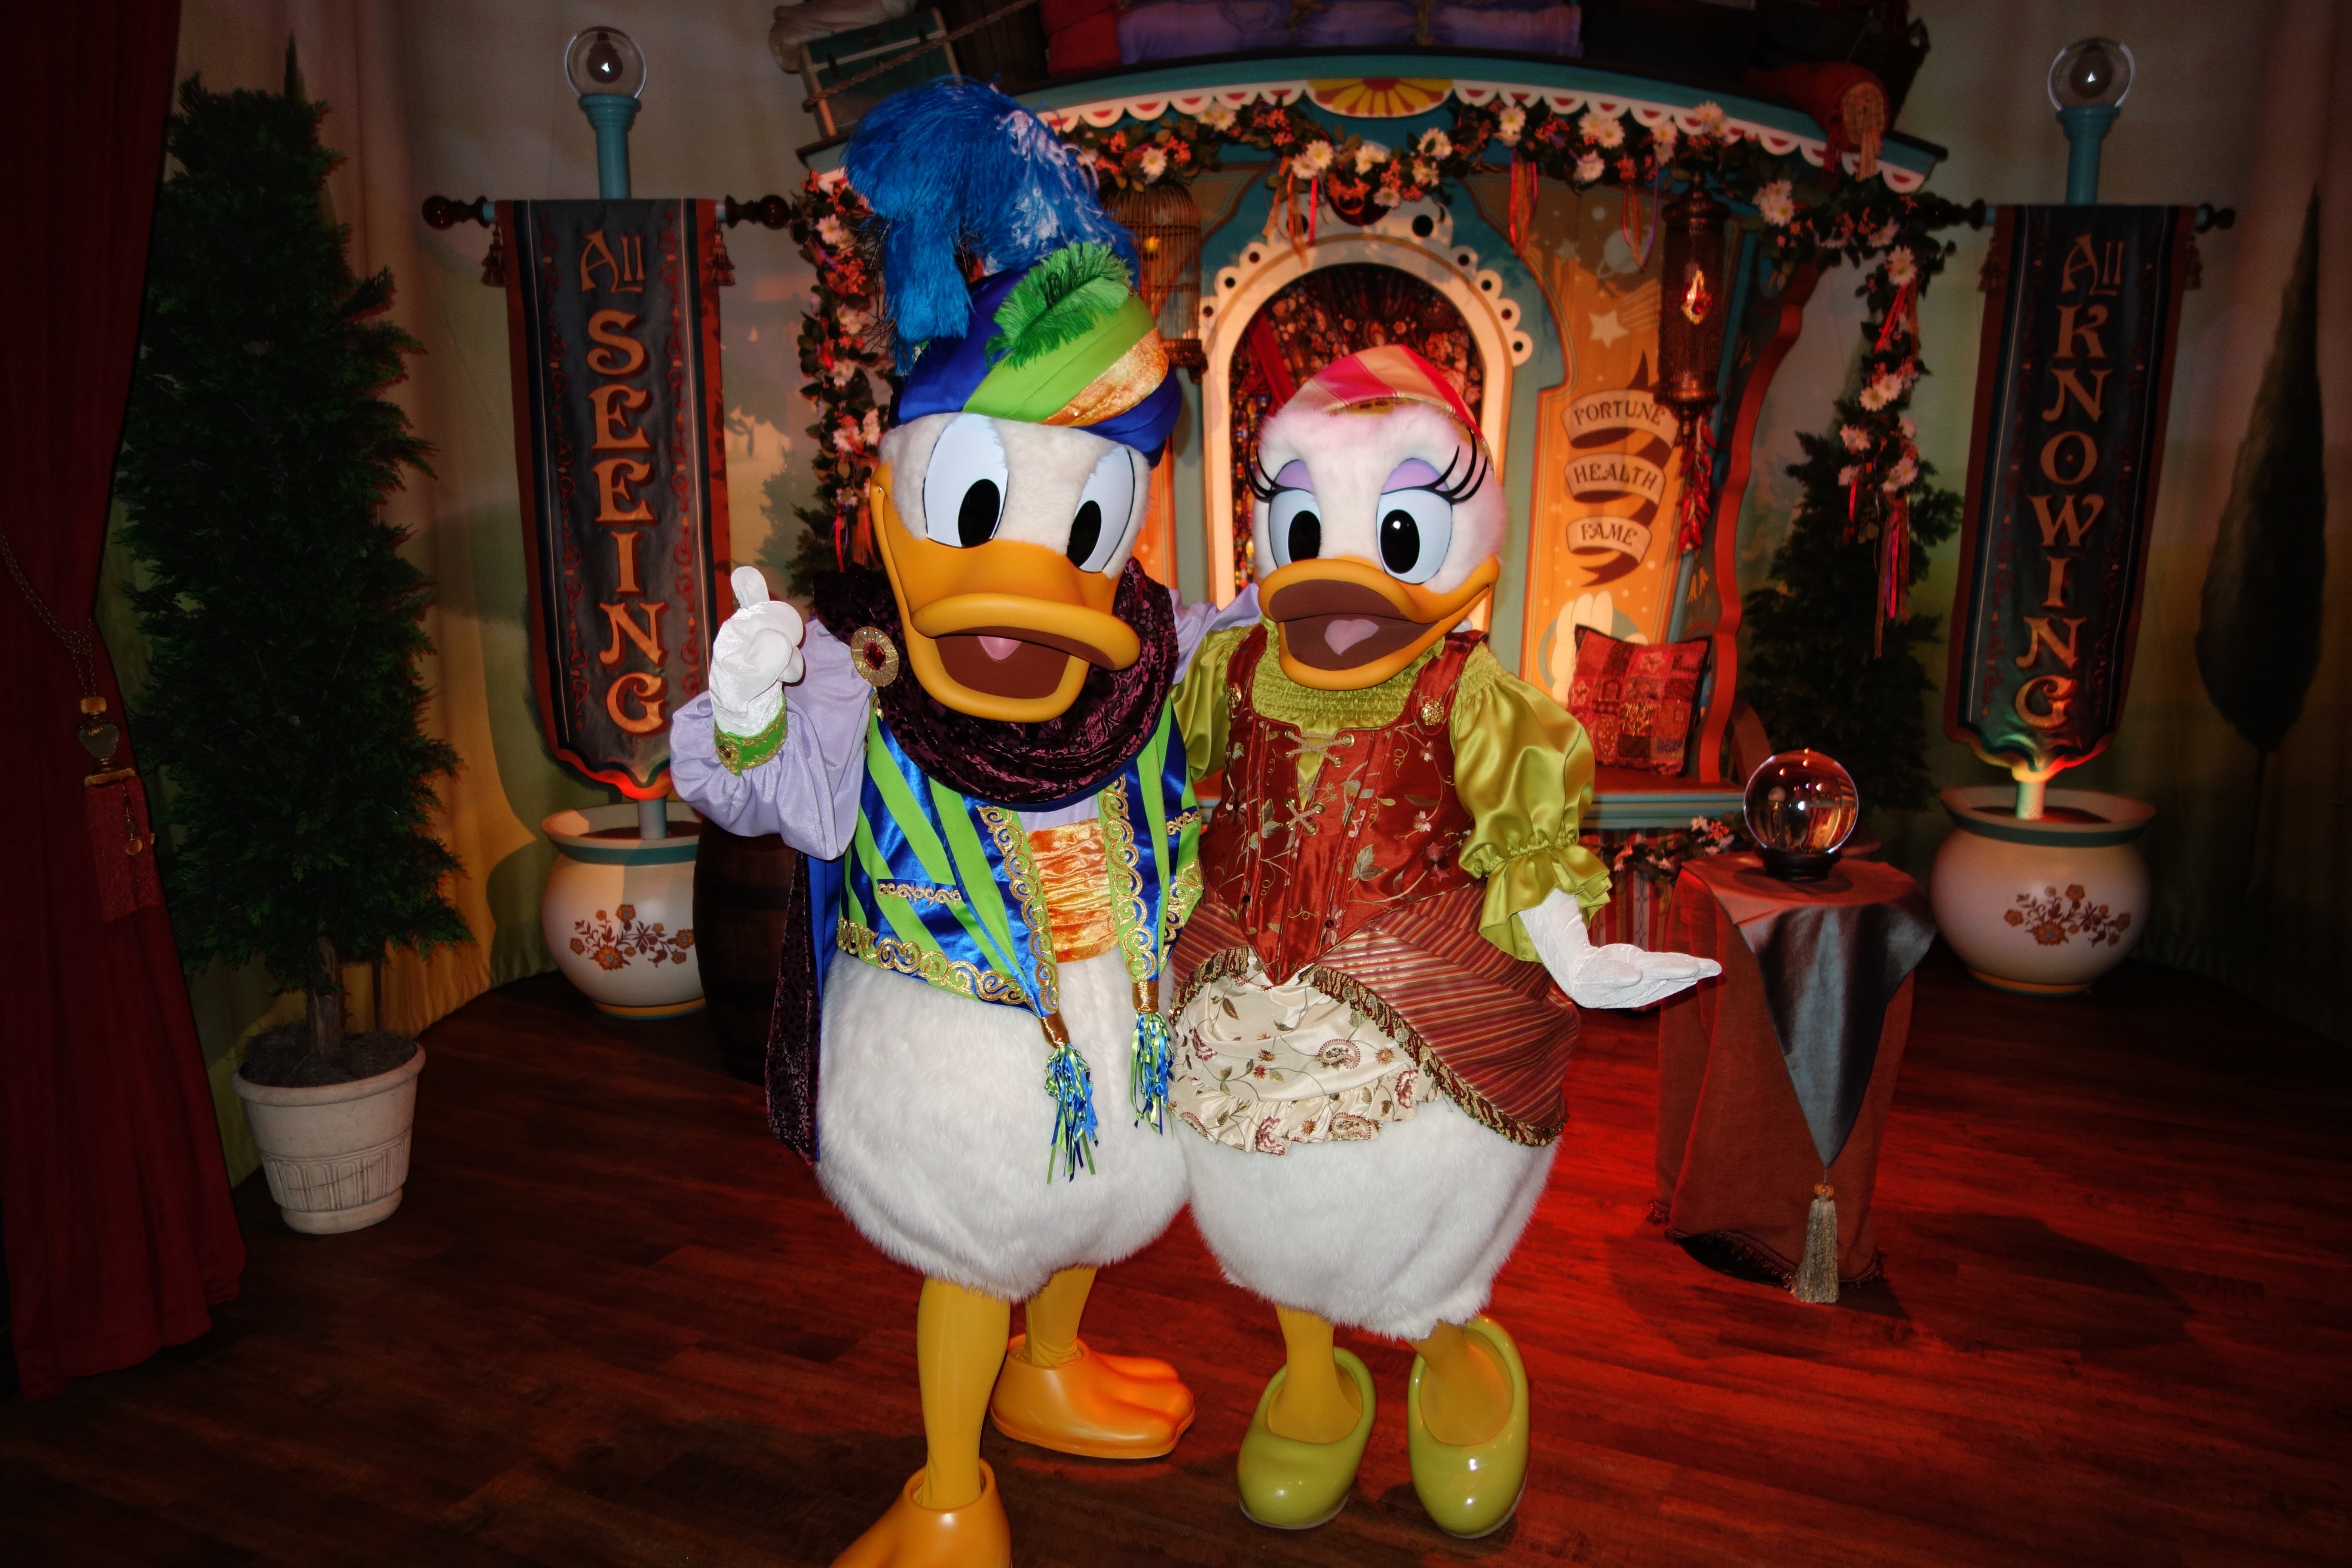 A rare shot of Daisy and Donald together inside Pete's Silly Sideshow.  I entered Goofy/Donald's side.  There was only one family in the tent, so Donald was escorting a family from his meet to Minnie.  He had to stop to give Daisy a little smooch and I crossed the rope (jumped it) and hustled over to request this rare photo.  They work together thematically very well.